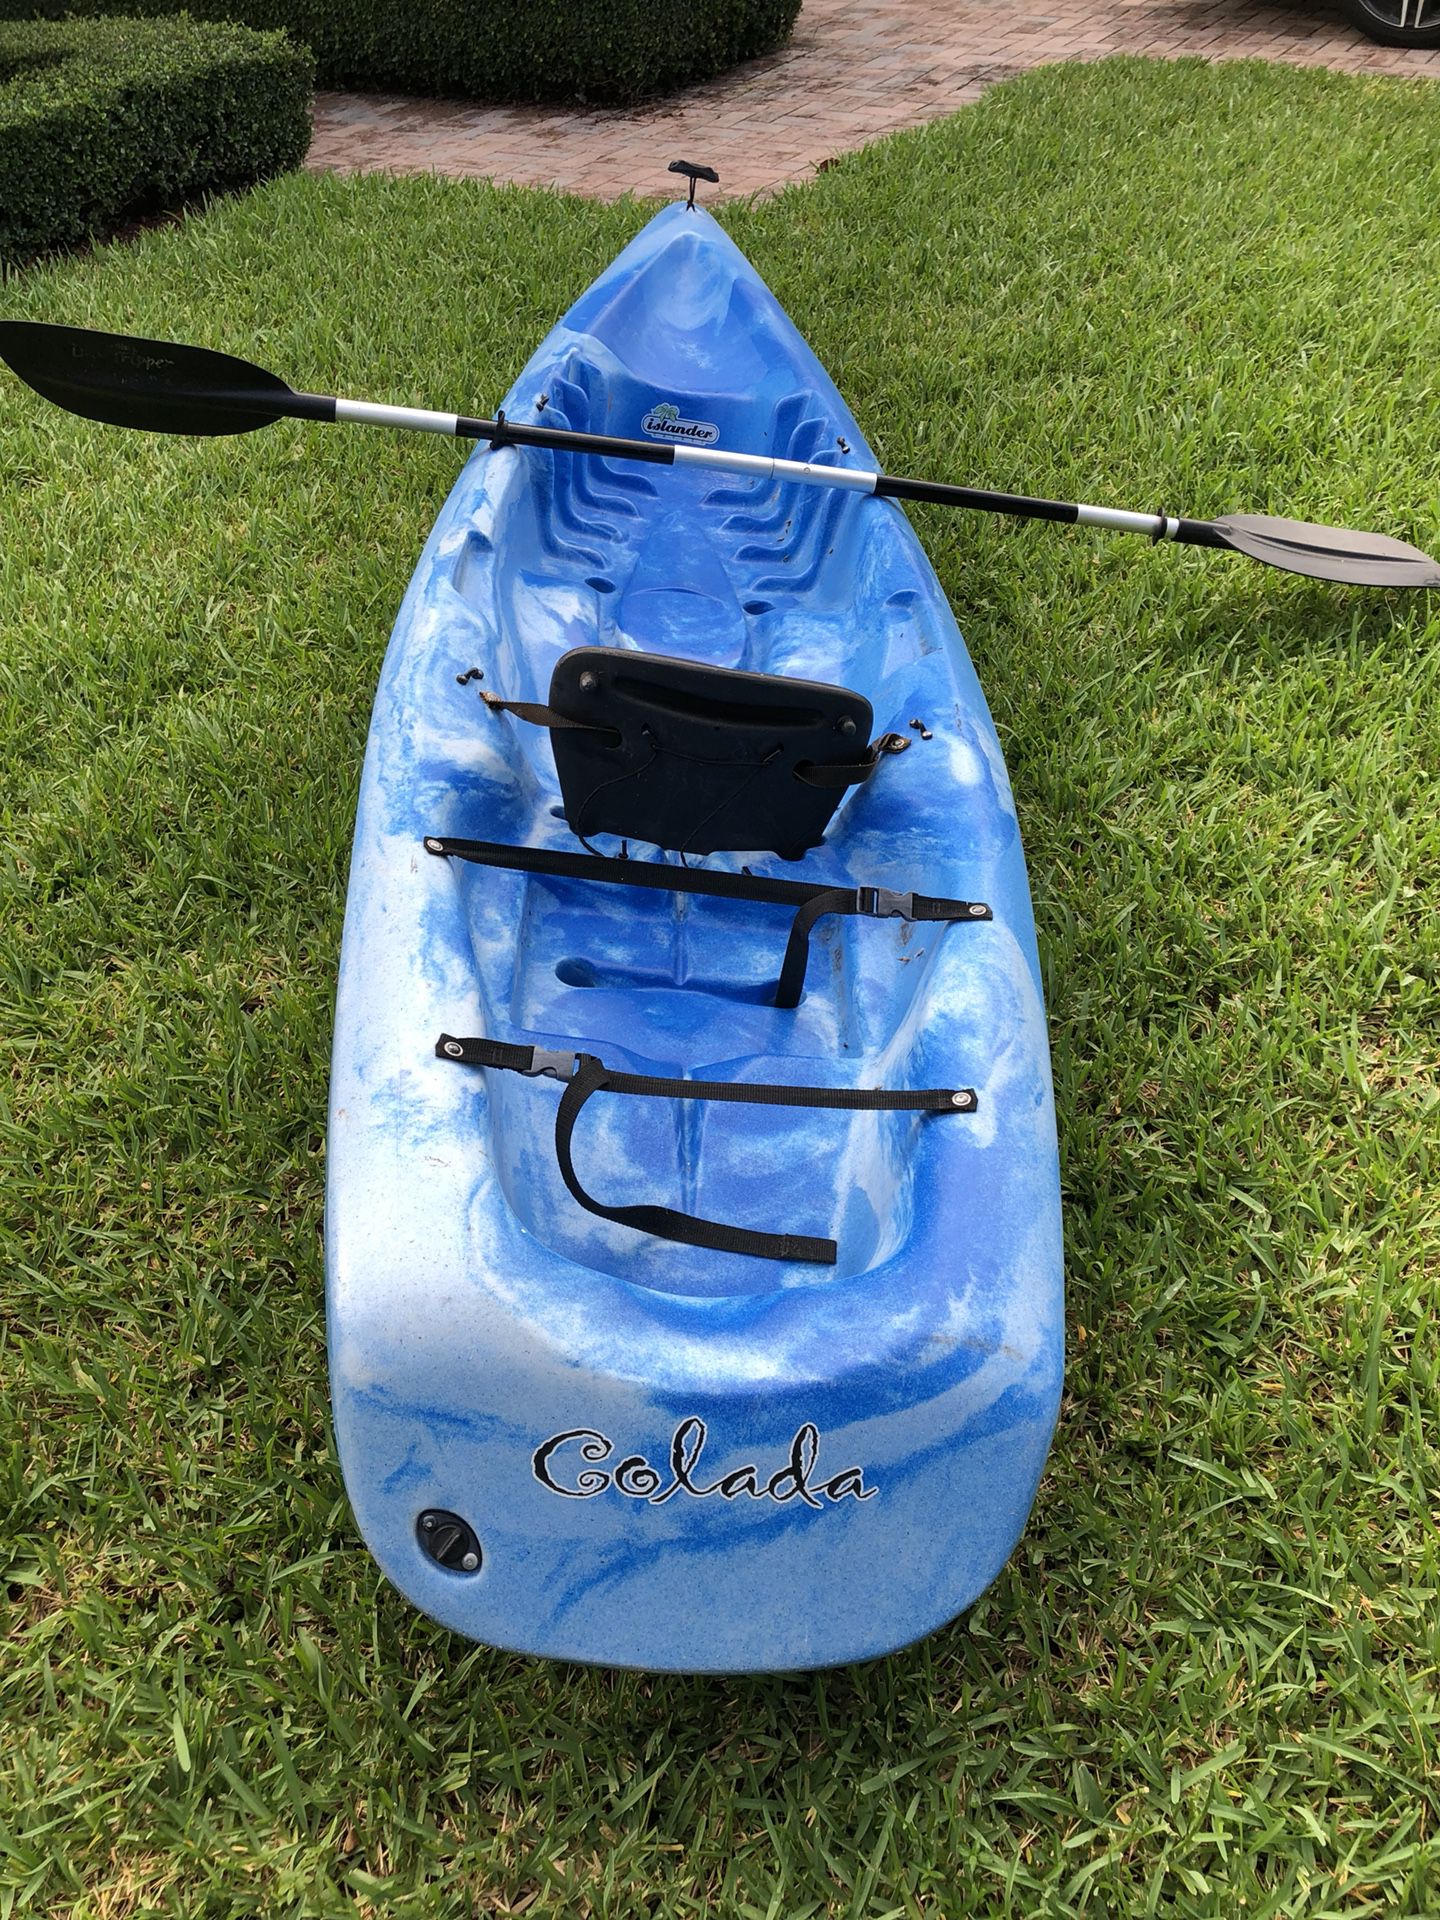 Fishing Kayaks With Trailer for Sale in Tarpon Springs, FL - OfferUp